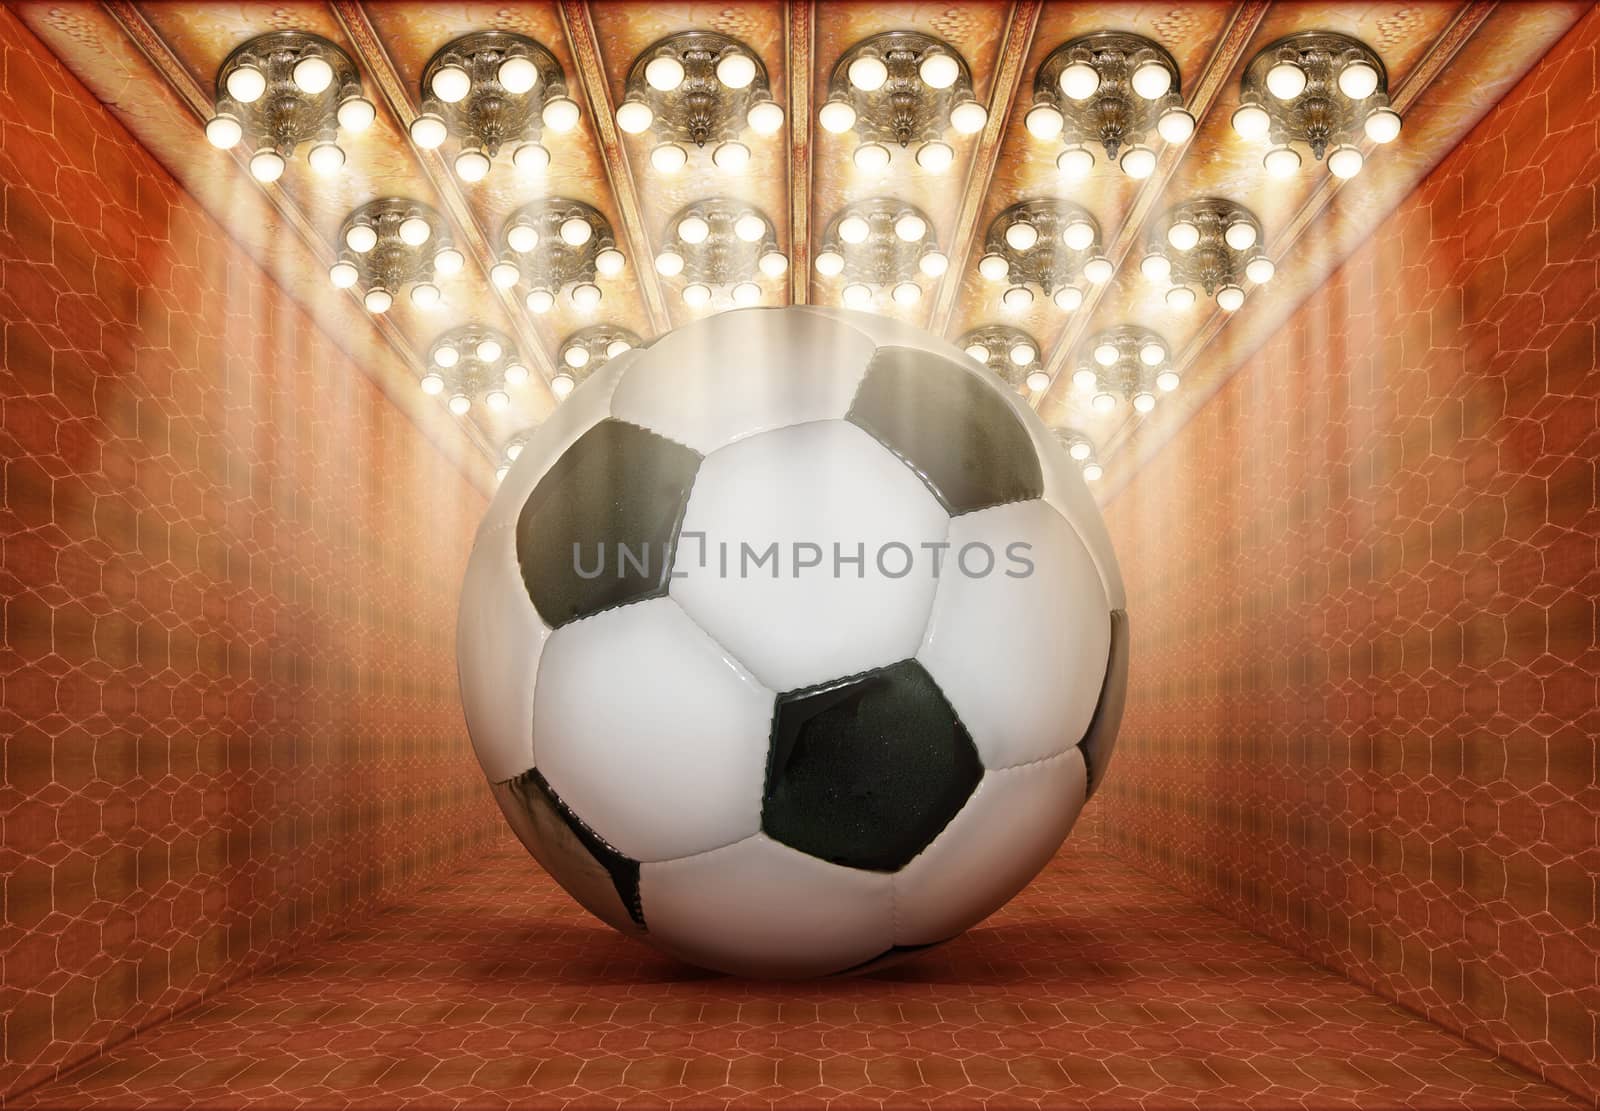 Photo-illustration of a gigantic soccer ball in a museum.